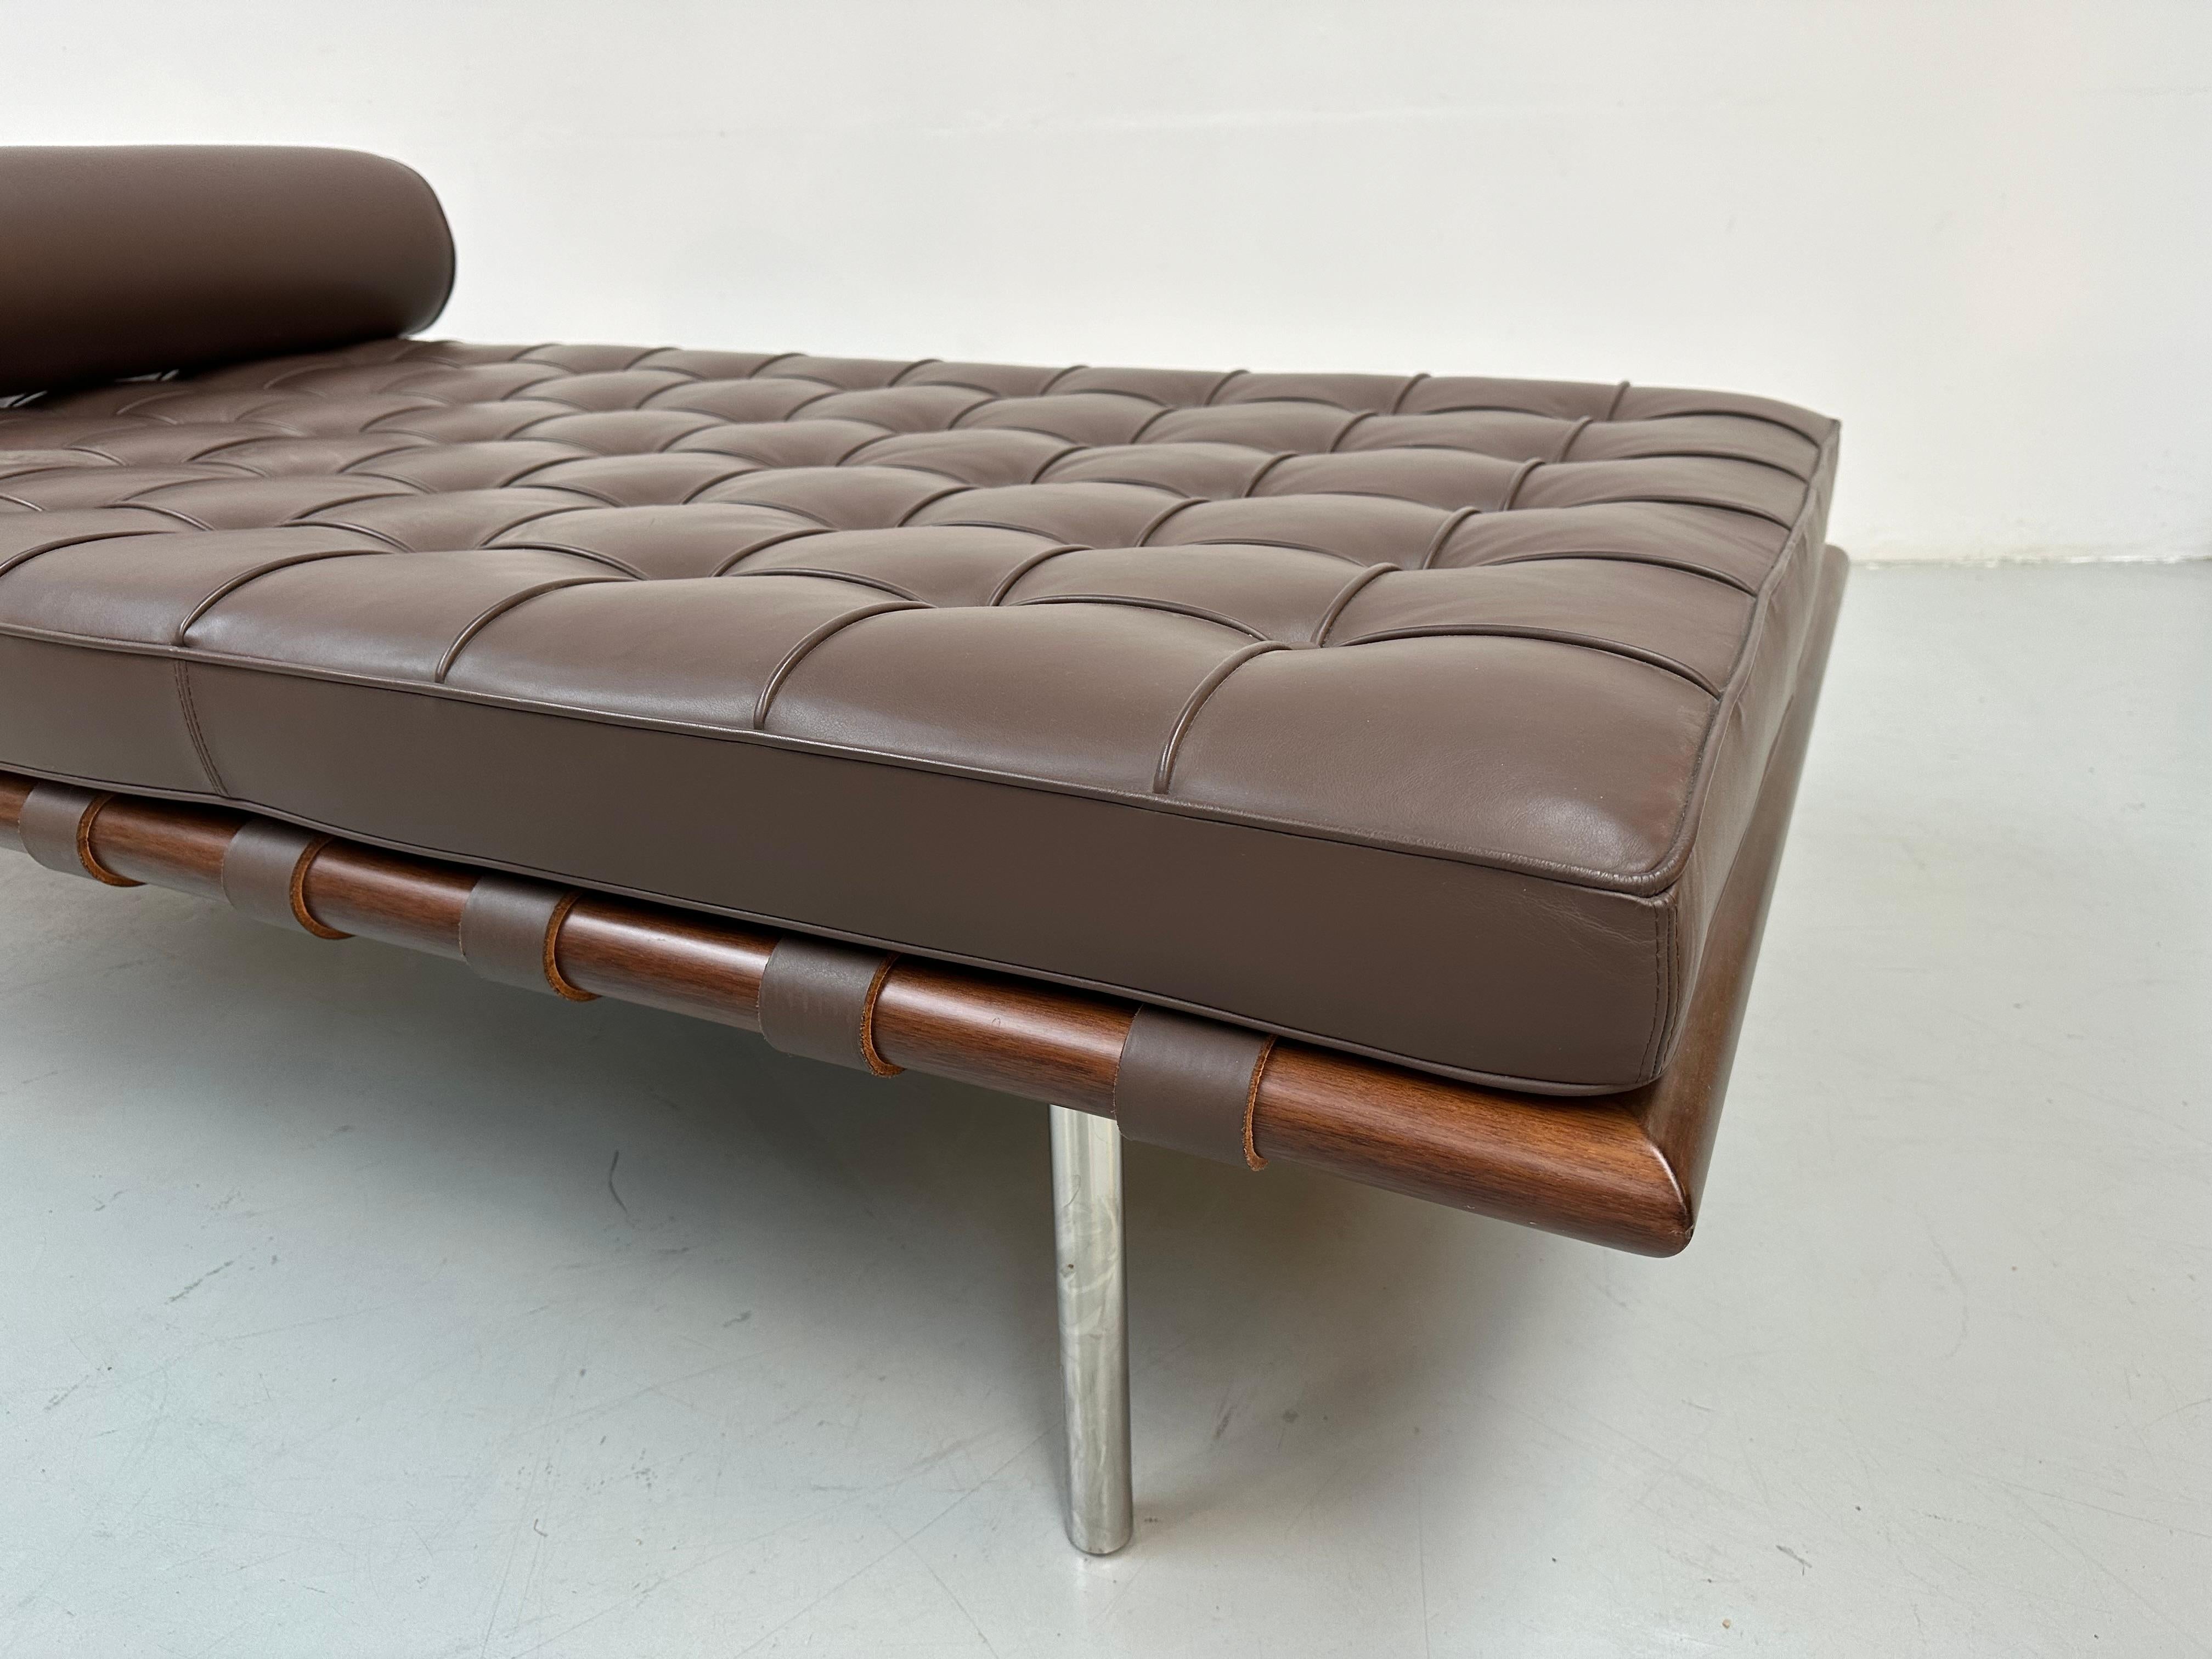 Barcelona Daybed in Brown Leather by Ludwig Mies van der Rohe for Knoll, 1980s. For Sale 4